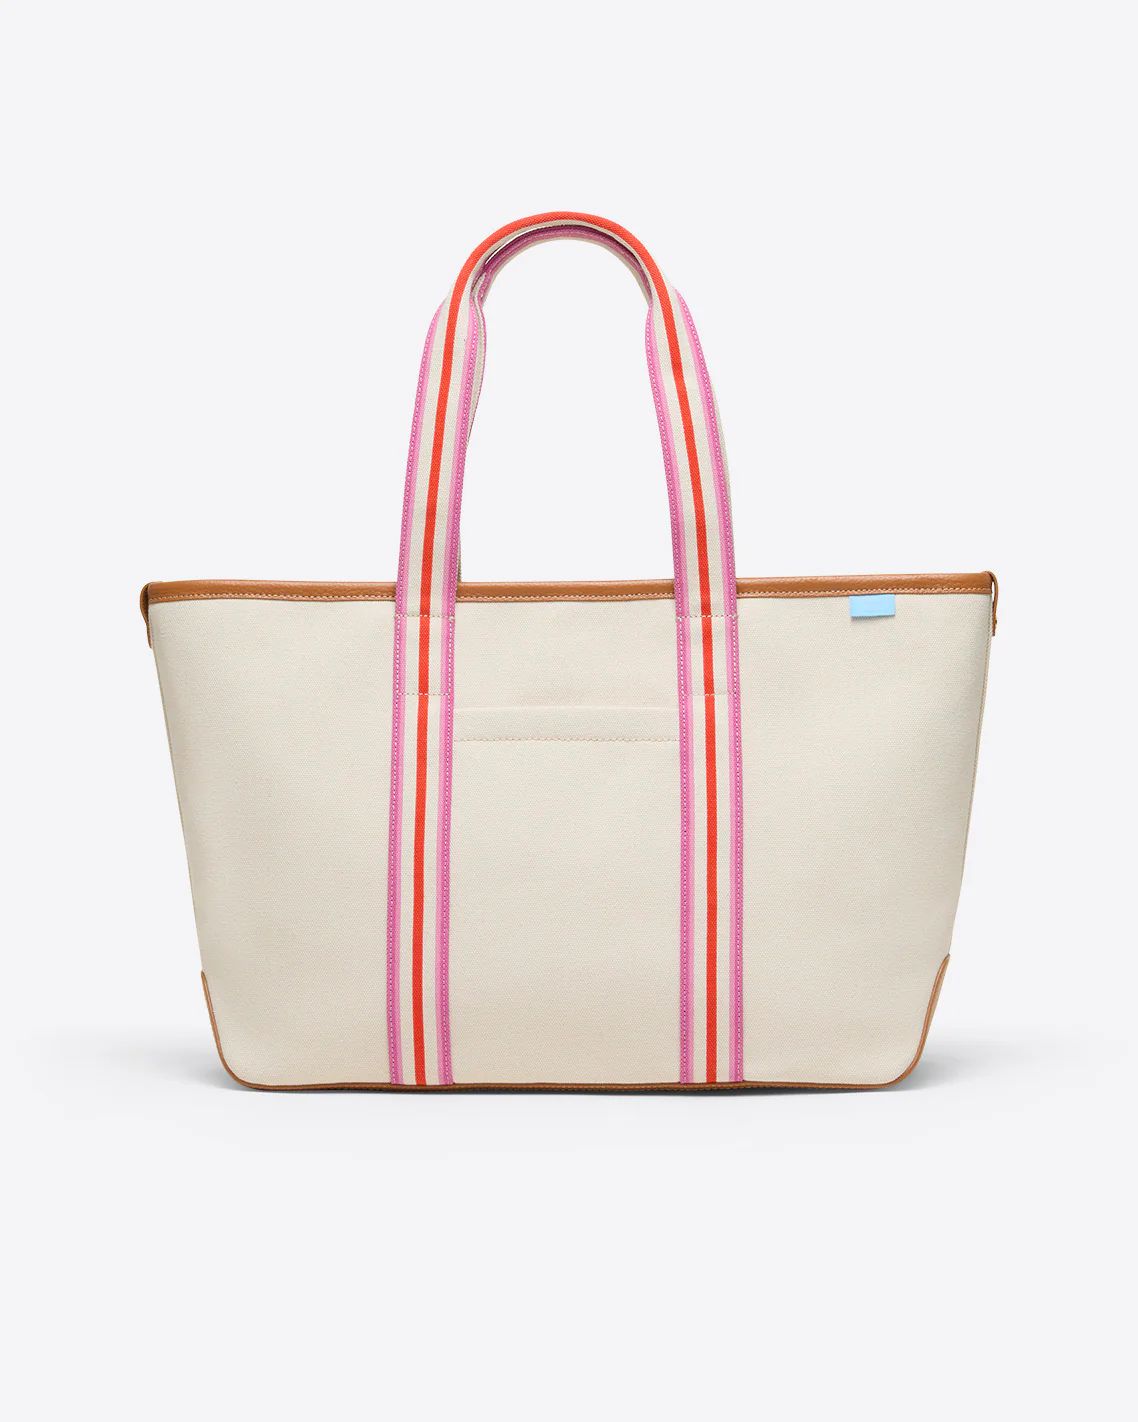 Reese's Limited-Edition Birthday Tote | Draper James (US)